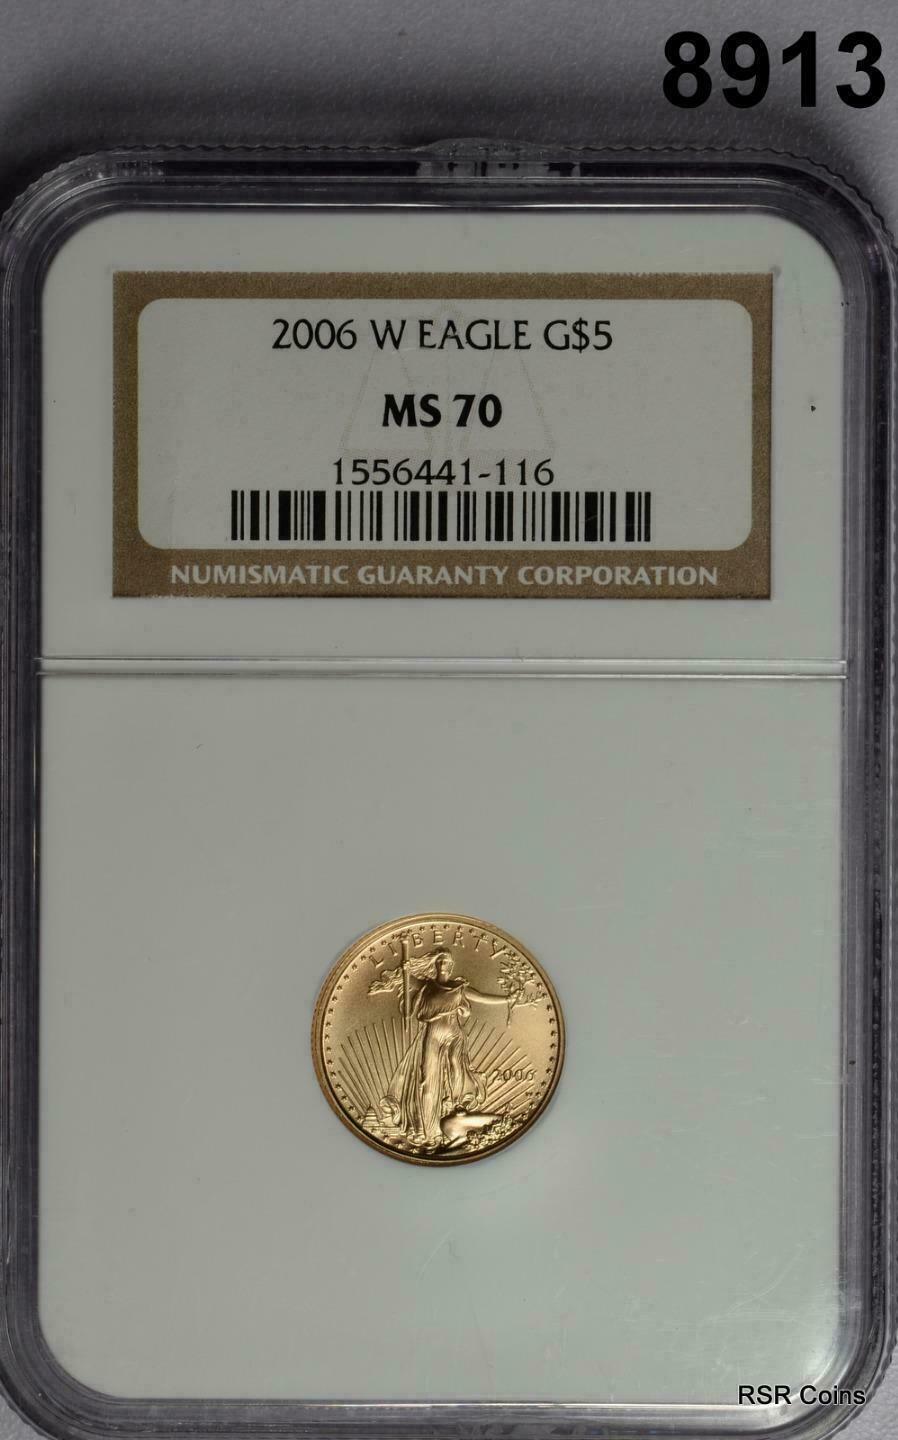 2006 W $5 GOLD EAGLE BURNISHED NGC CERTIFIED MS70 1/10TH OZ GOLD! #8913